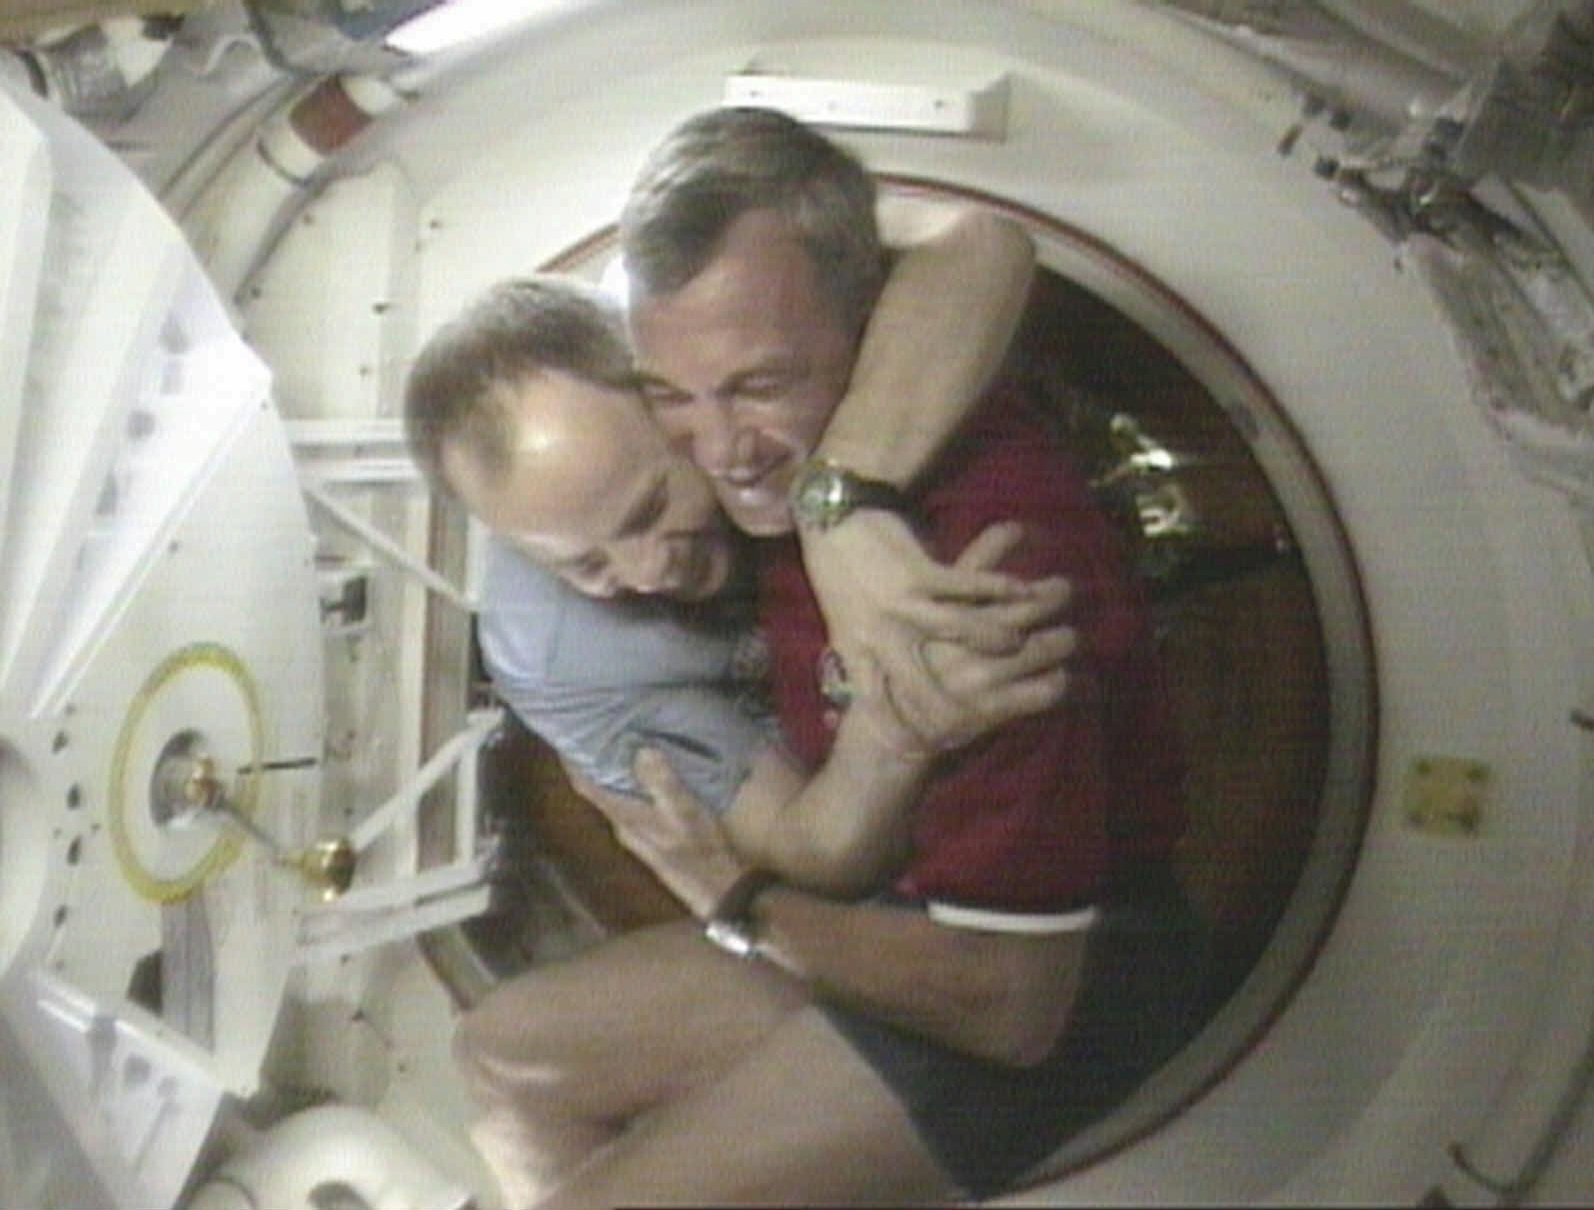 FILE - Shuttle Commander Terrence Wilcutt, right, and Mir Commander Anatoly Solovyev, left, hug after opening the hatches between the space shuttle Endeavour and the Russian Space station Mir Saturday, Jan. 24, 1998 in this image from television. Russia will opt out of the International Space Station after 2024 and focus on building its own orbiting outpost, the country's newly appointed space chief said Tuesday, July 26, 2022. (NASA via AP, File)